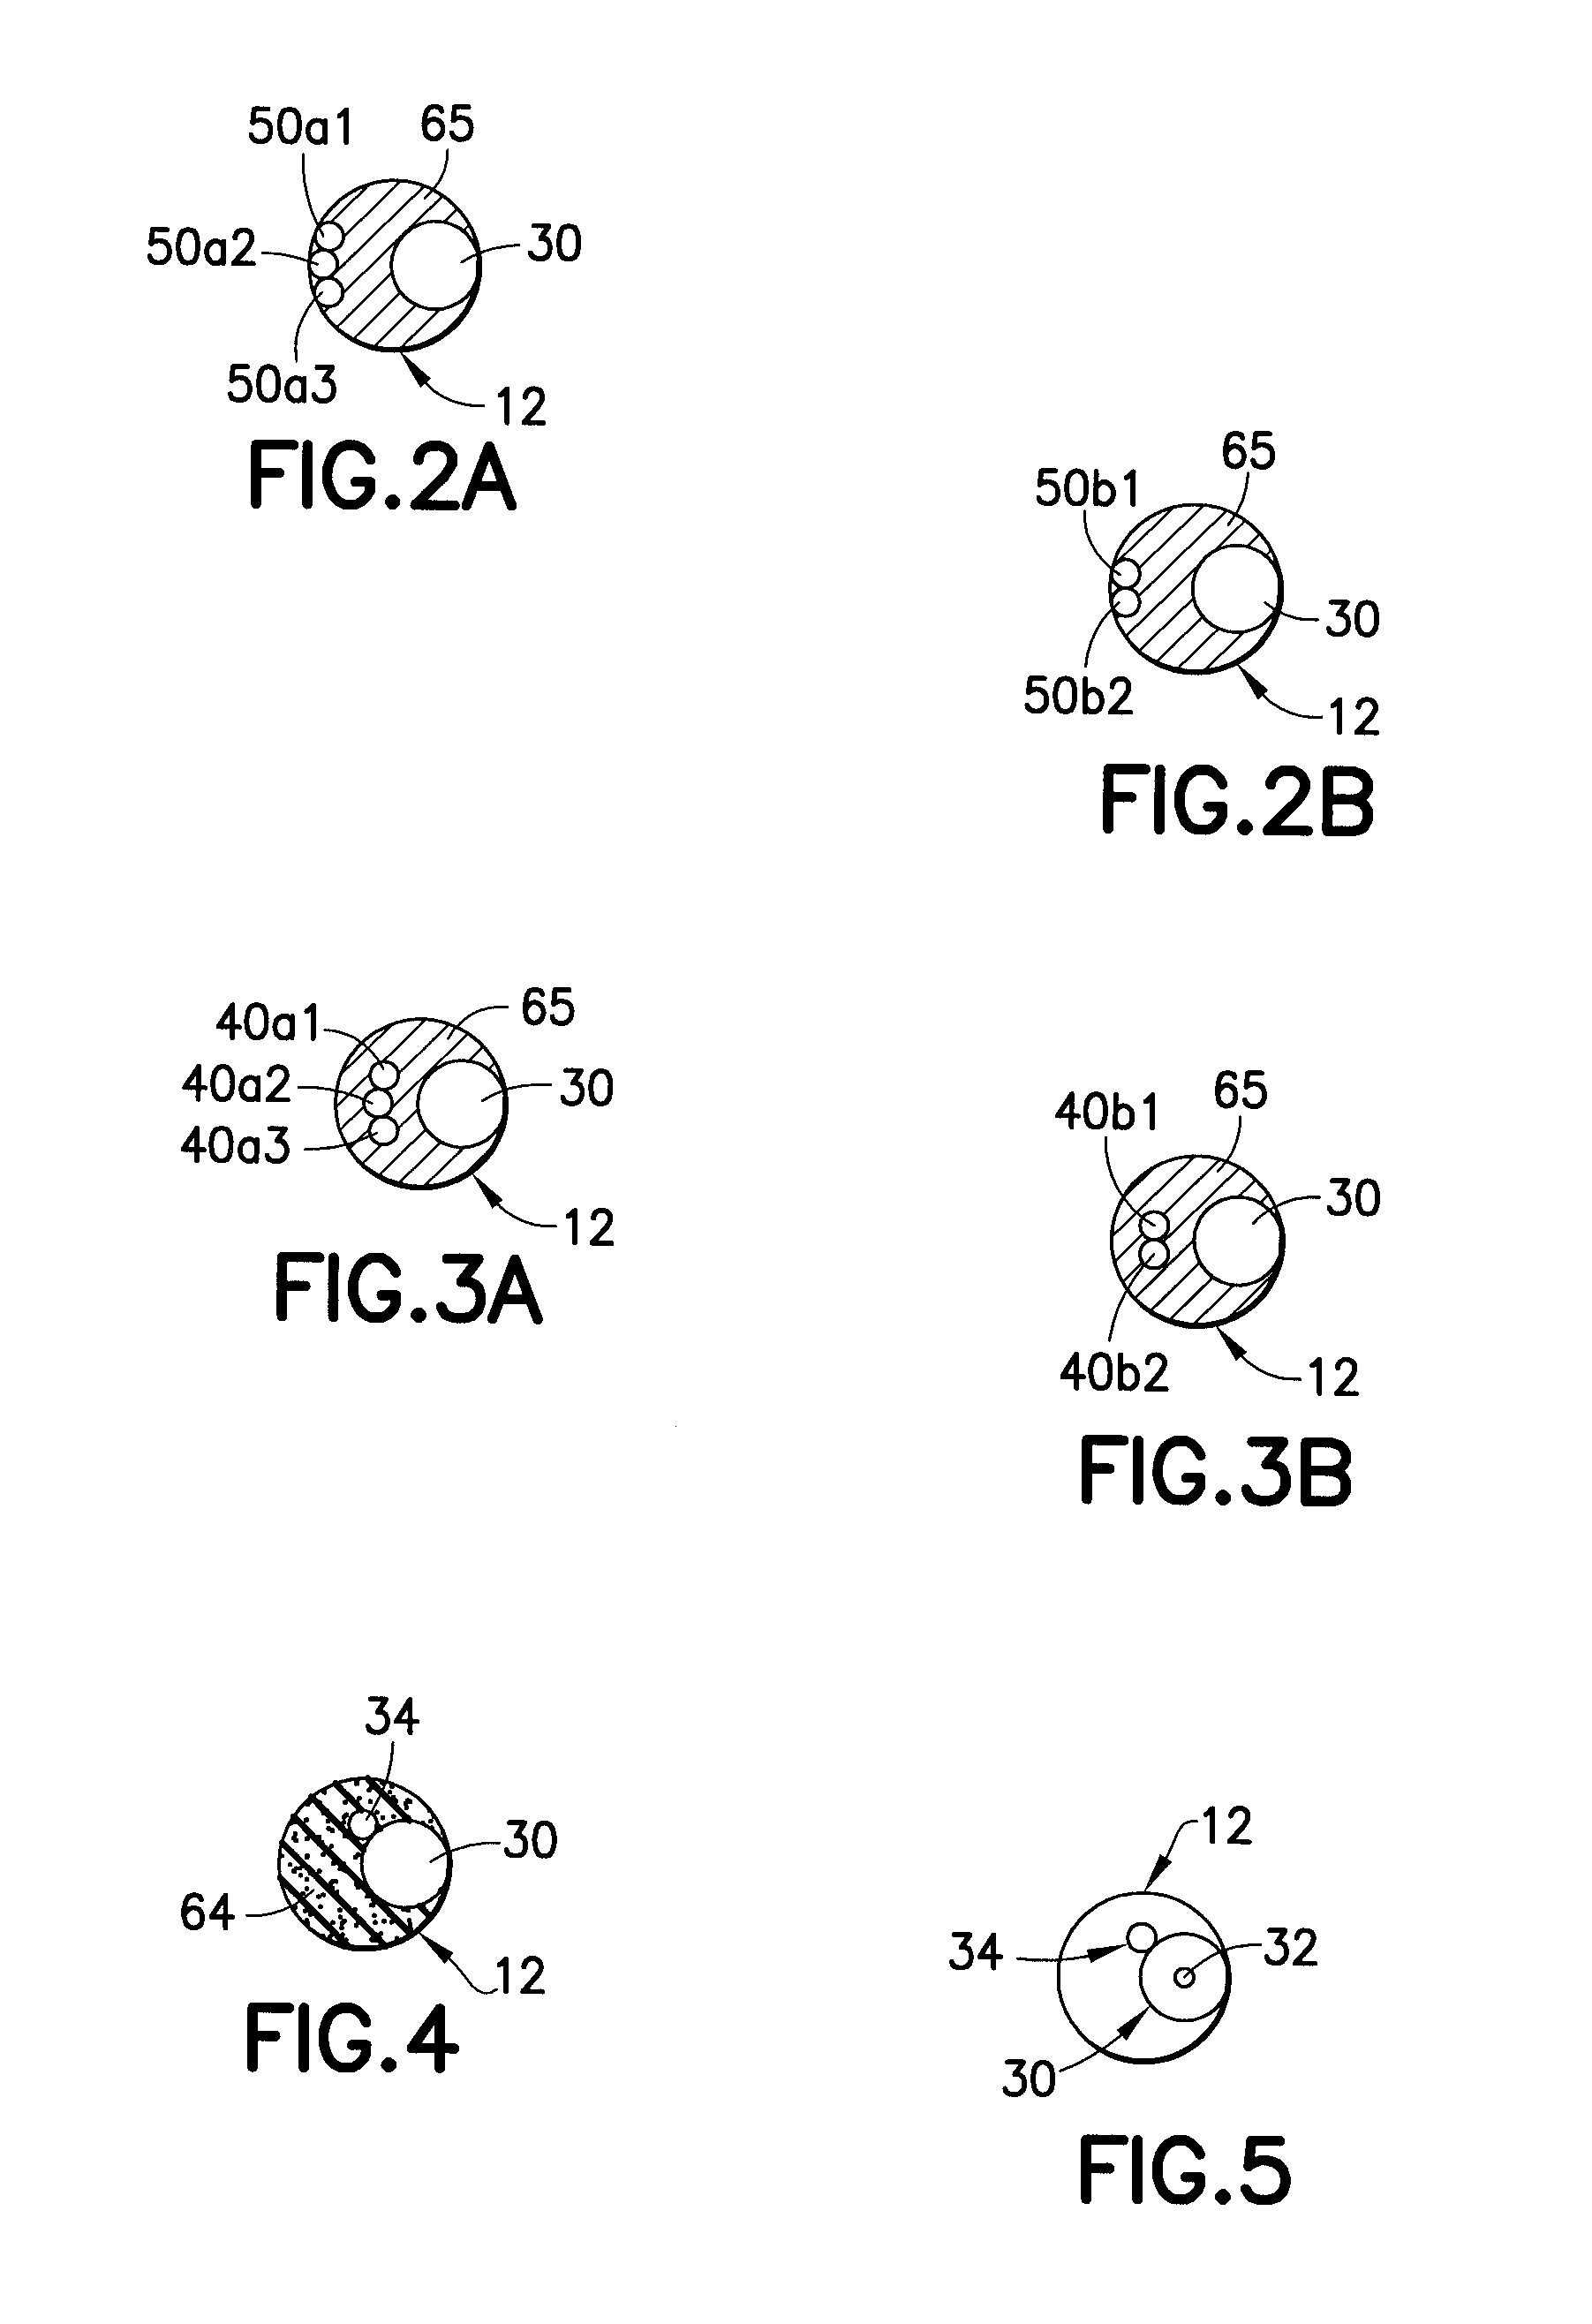 Well logging apparatus and method for measuring formation properties